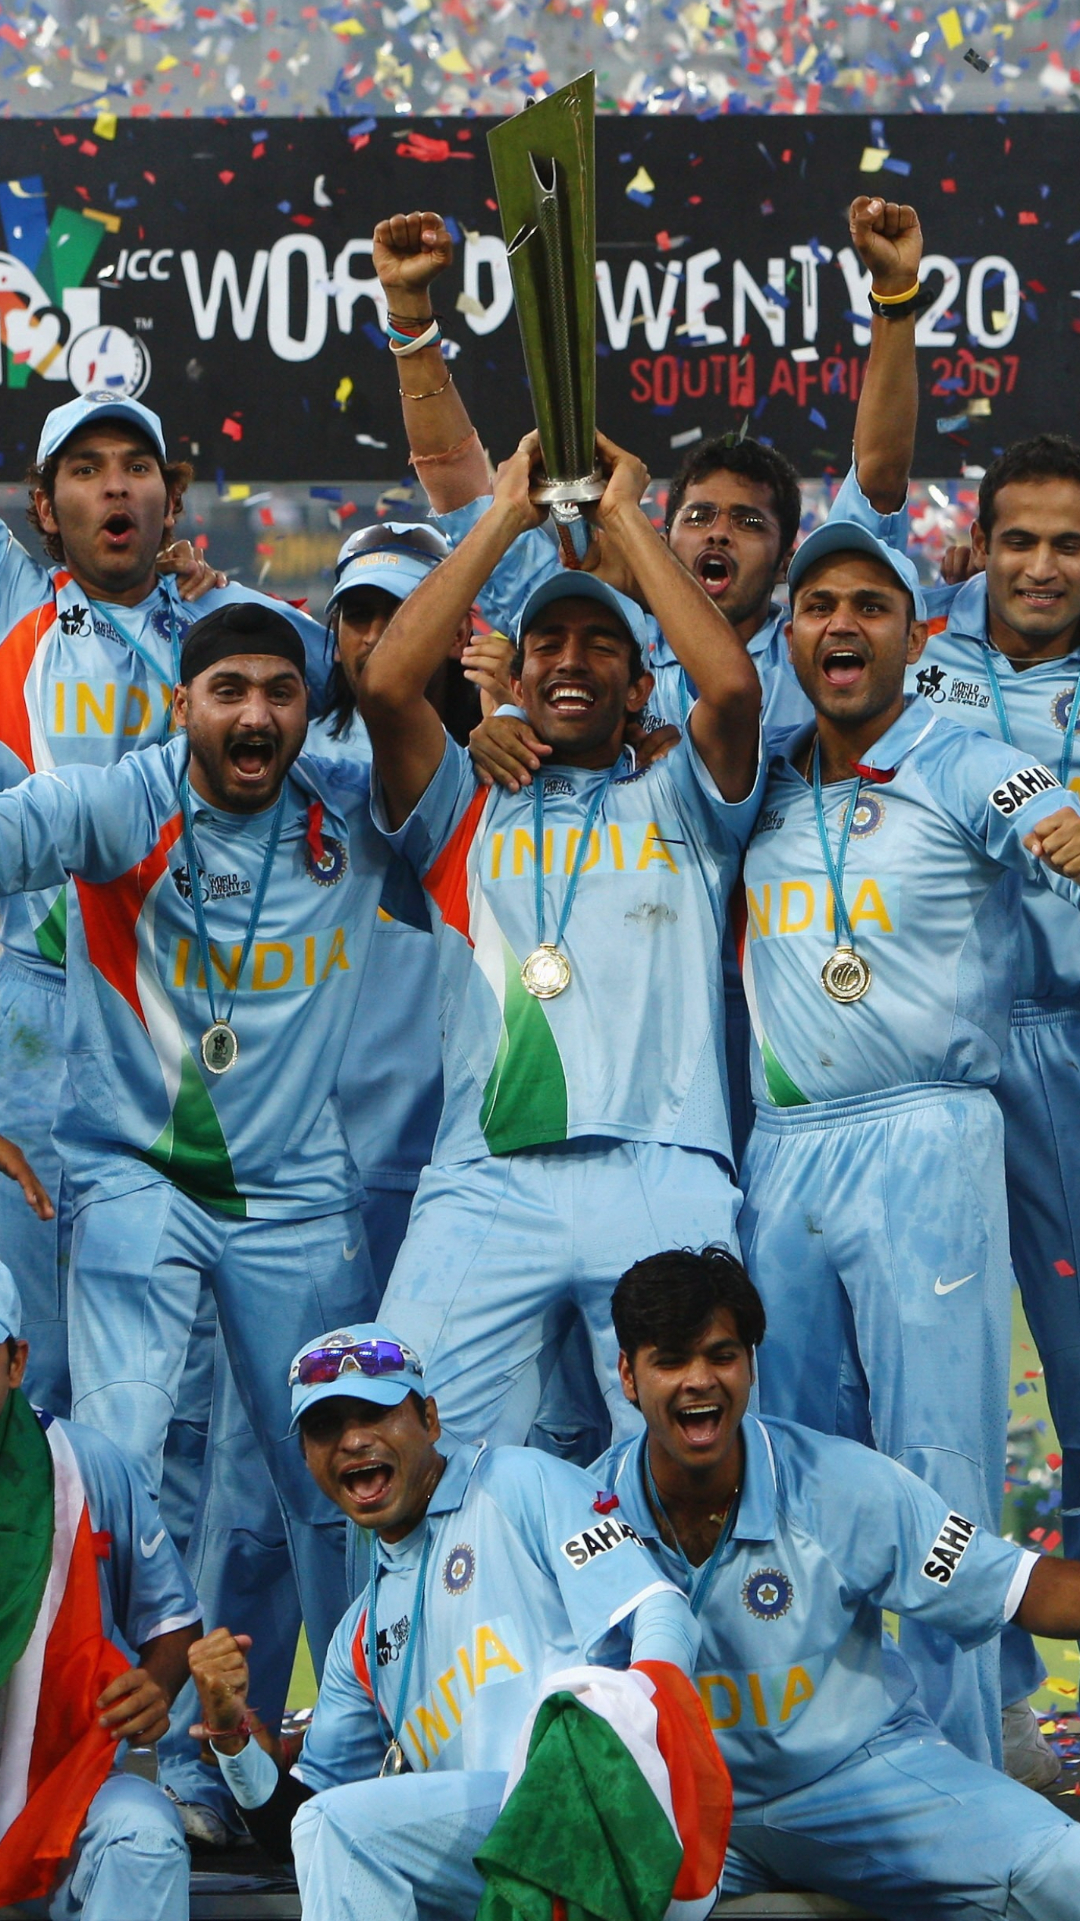 2007 World Cup victory: Rewinding the memorable moments from India's inaugural T20 World Cup victory